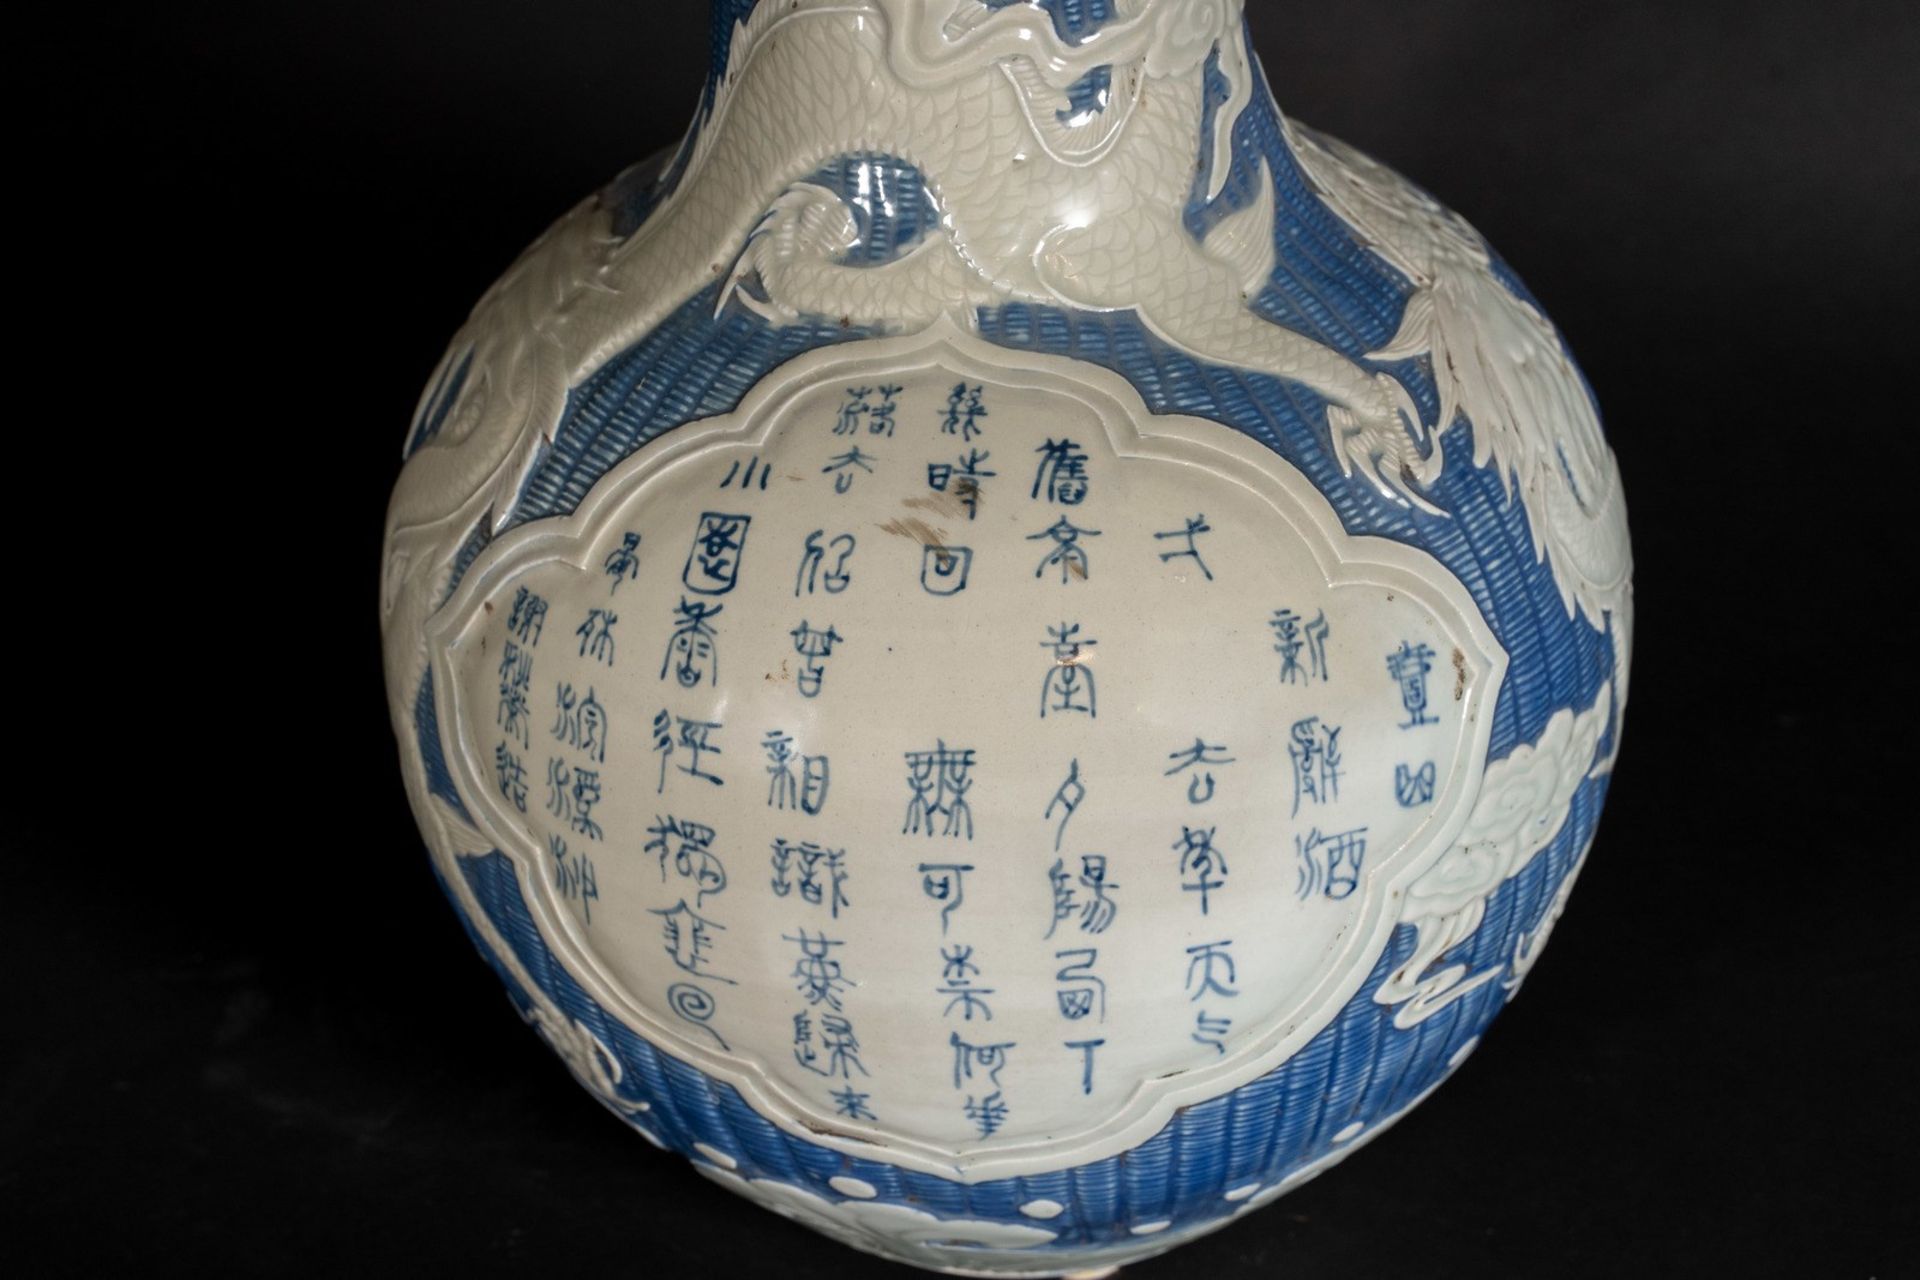 Arte Cinese A blue and white porcelain tianchuping globular vase with dragon and inscription China, - Image 3 of 6